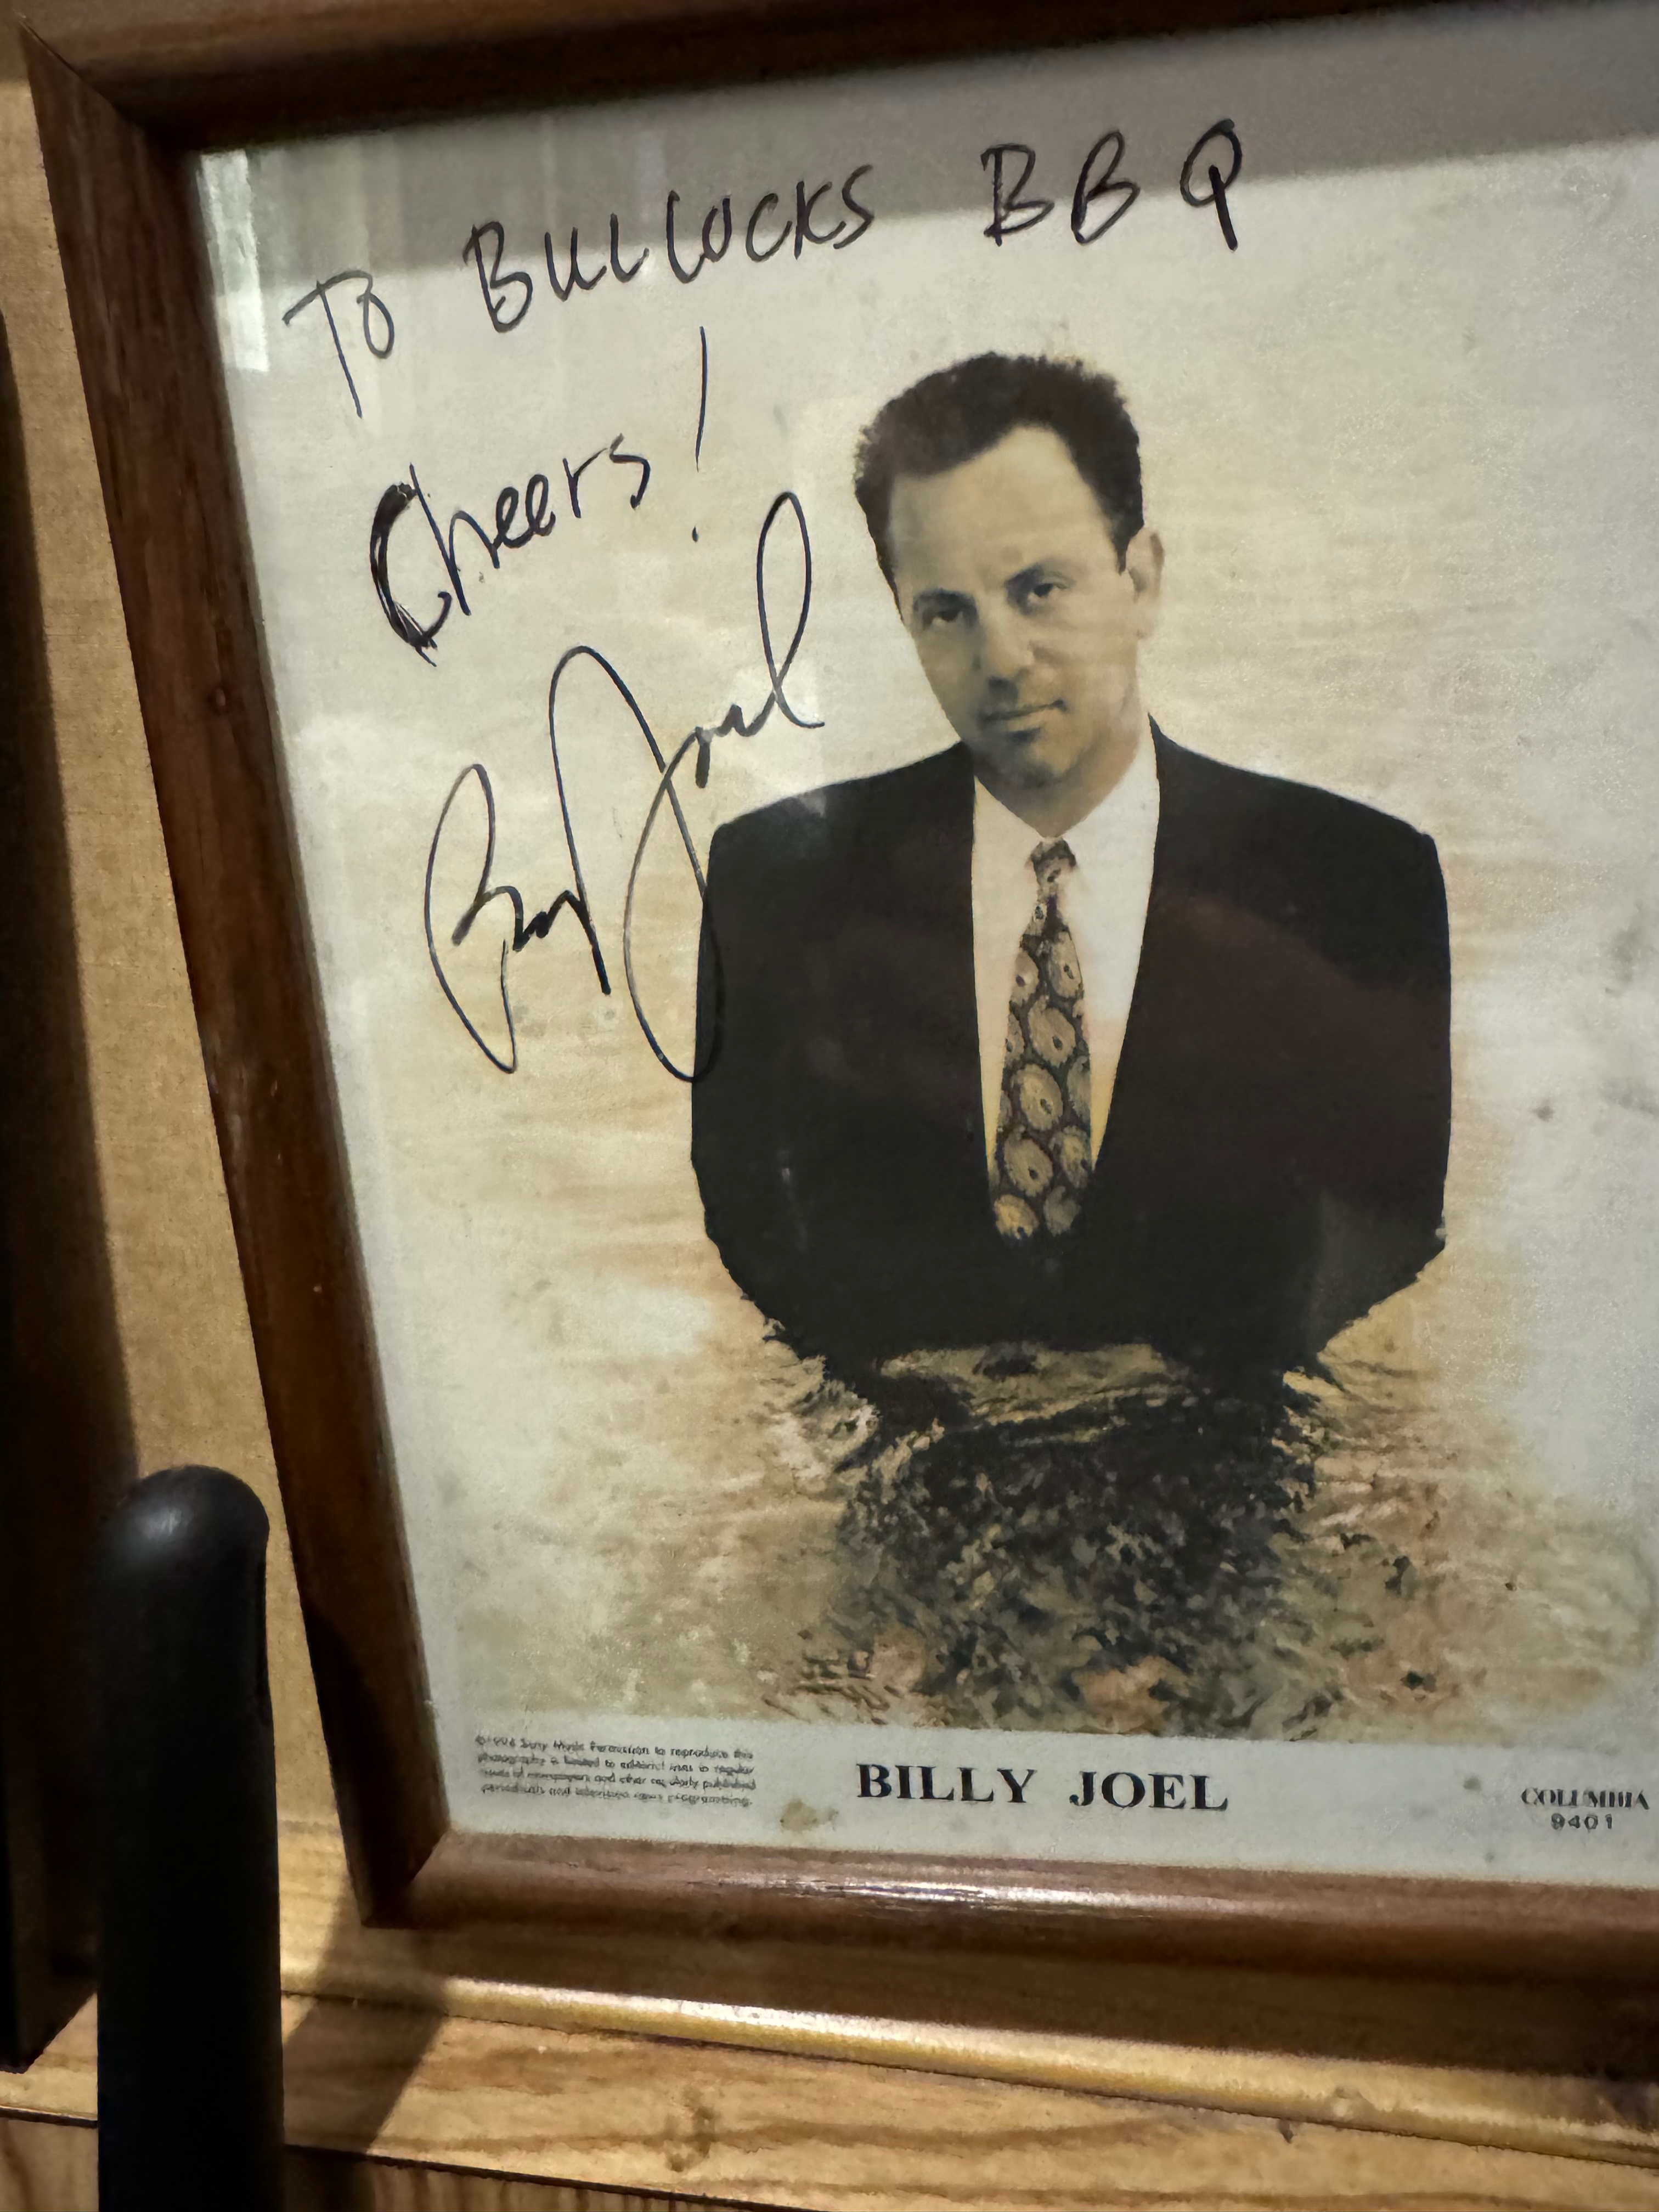 autographed picture of Billy Joel at Bullock’s Bar-B-Cue in Durham, NC